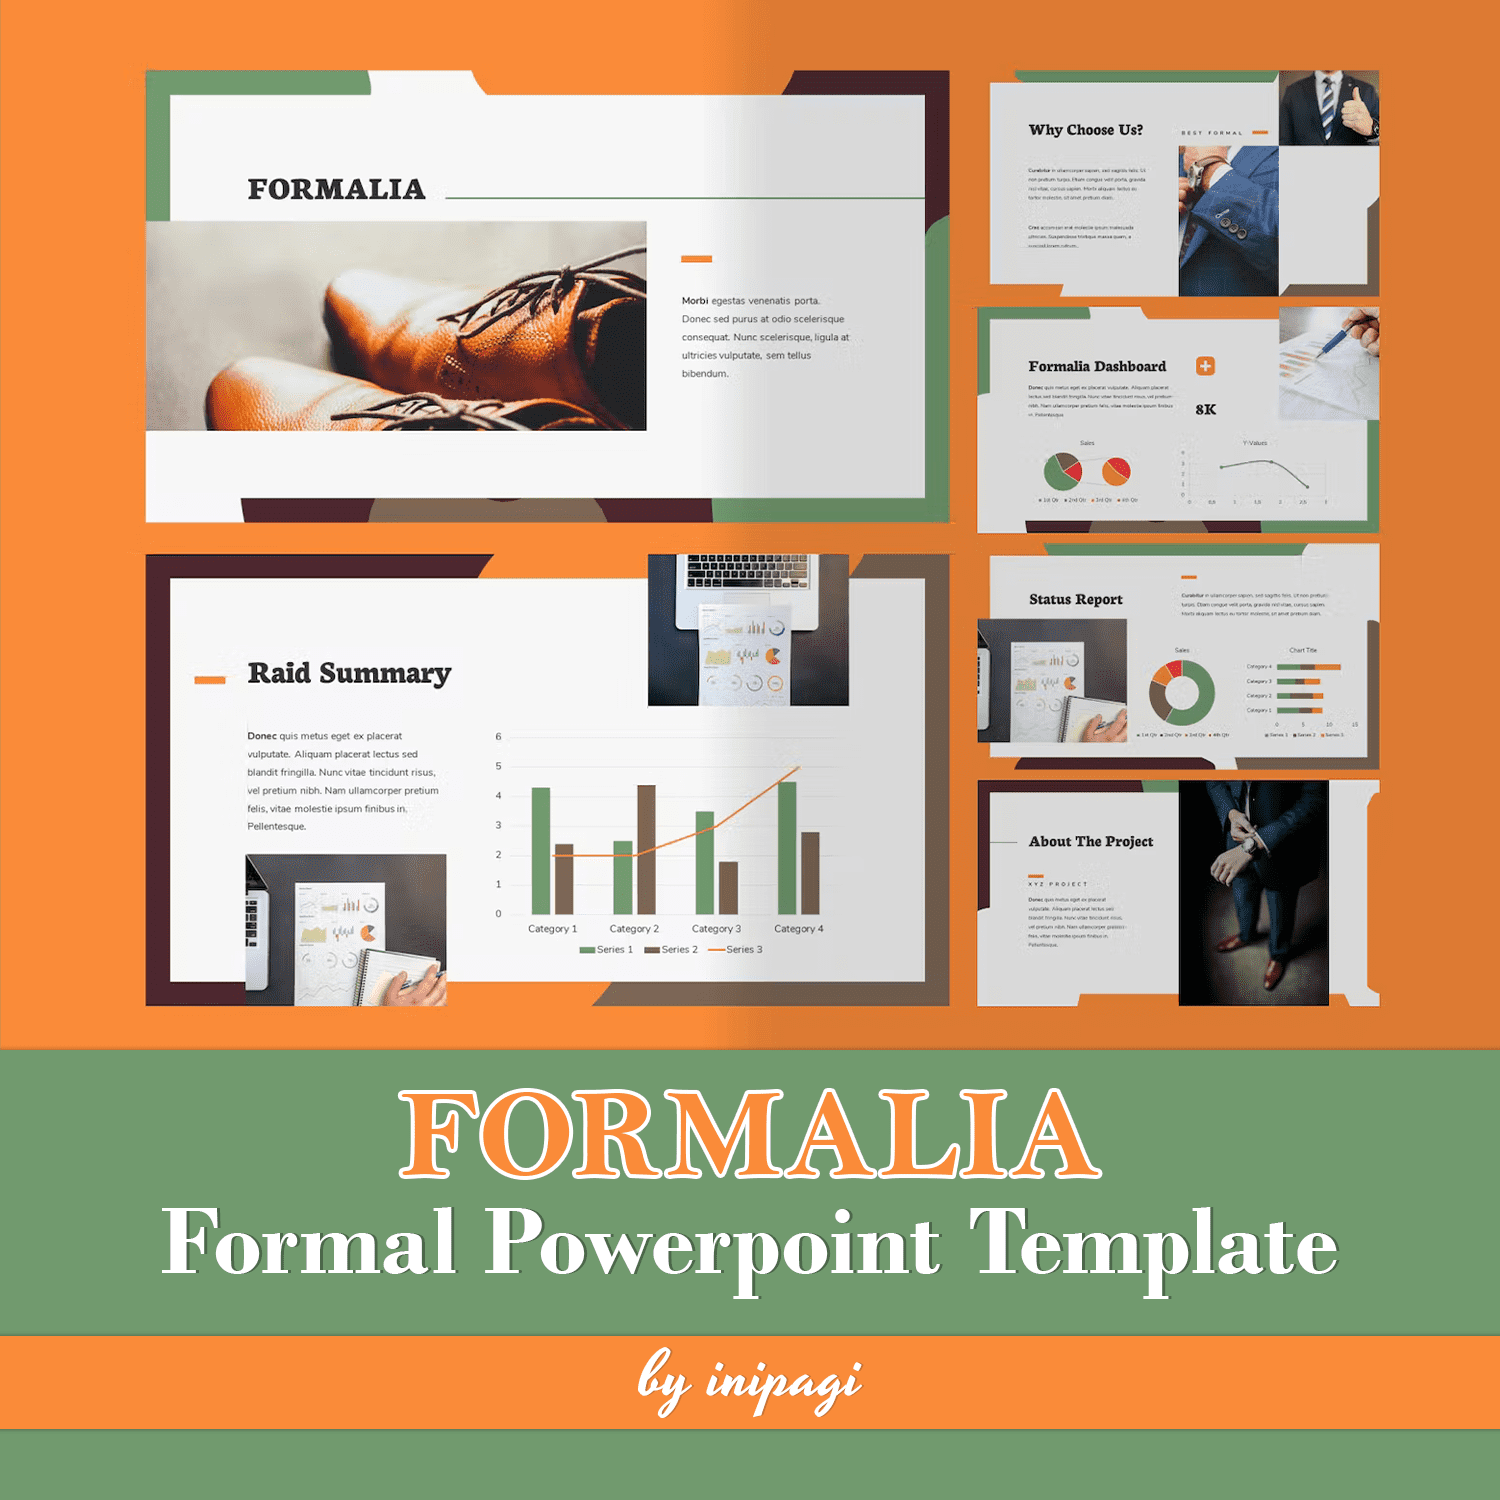 Formalia - Formal Powerpoint Template.